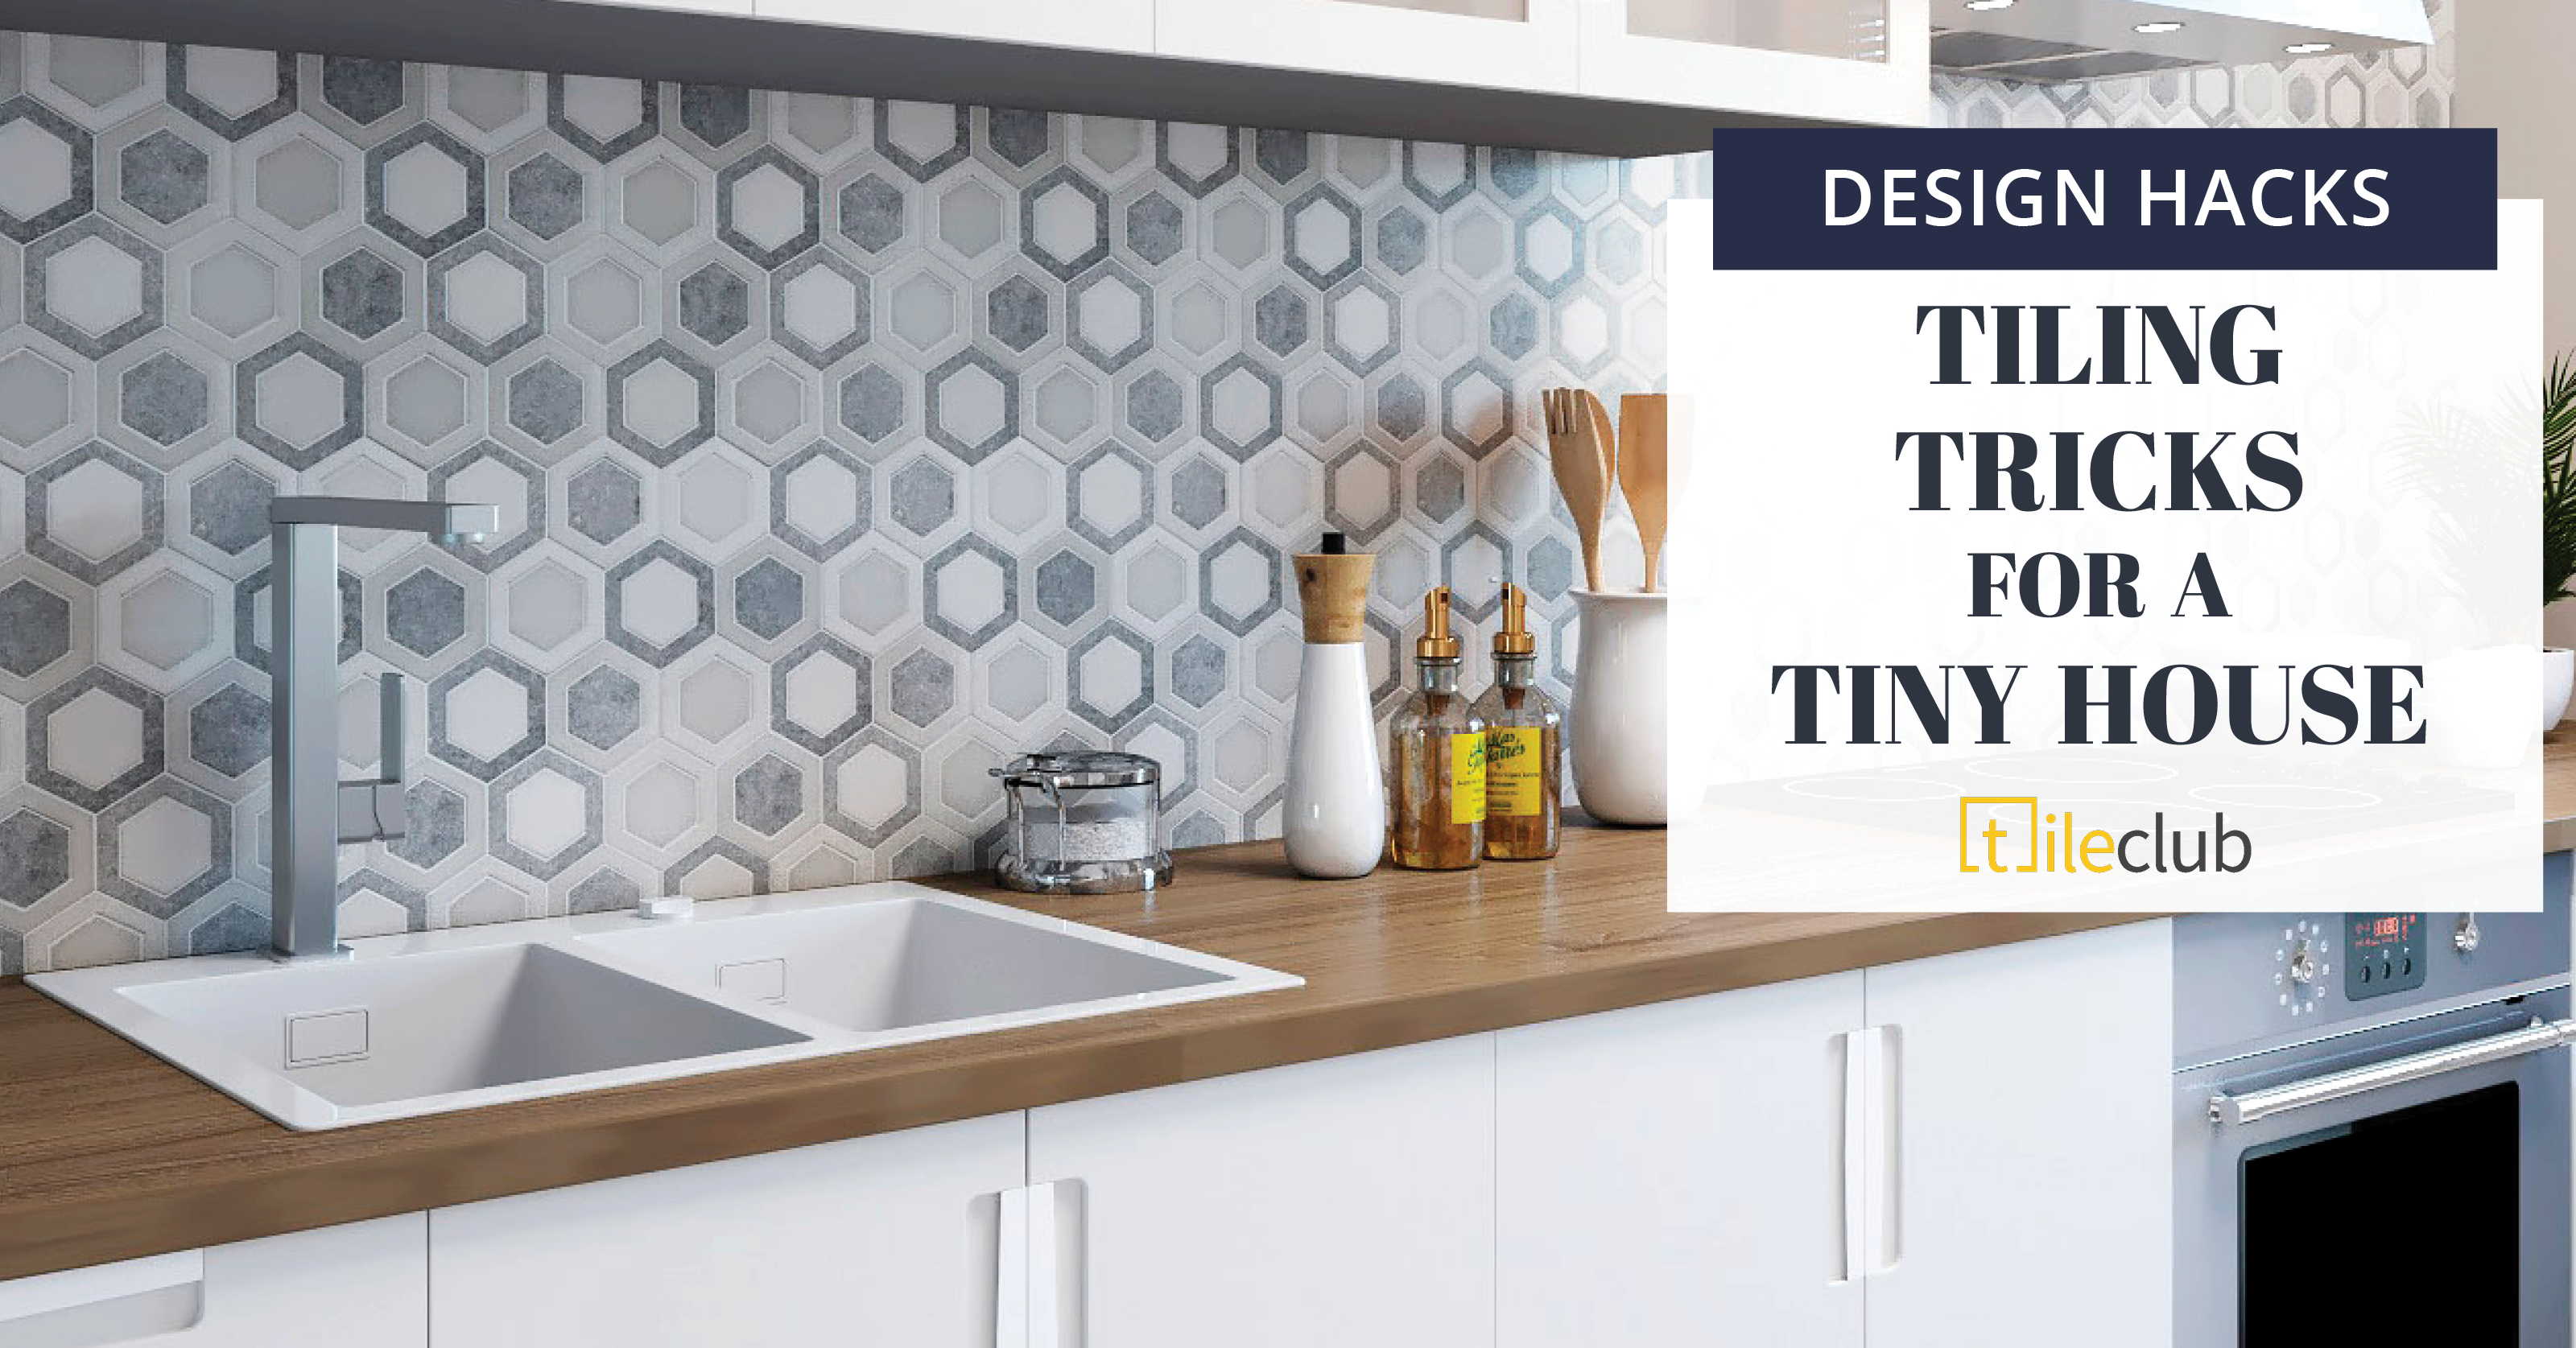 Tile Decorating Hacks for a Tiny Home